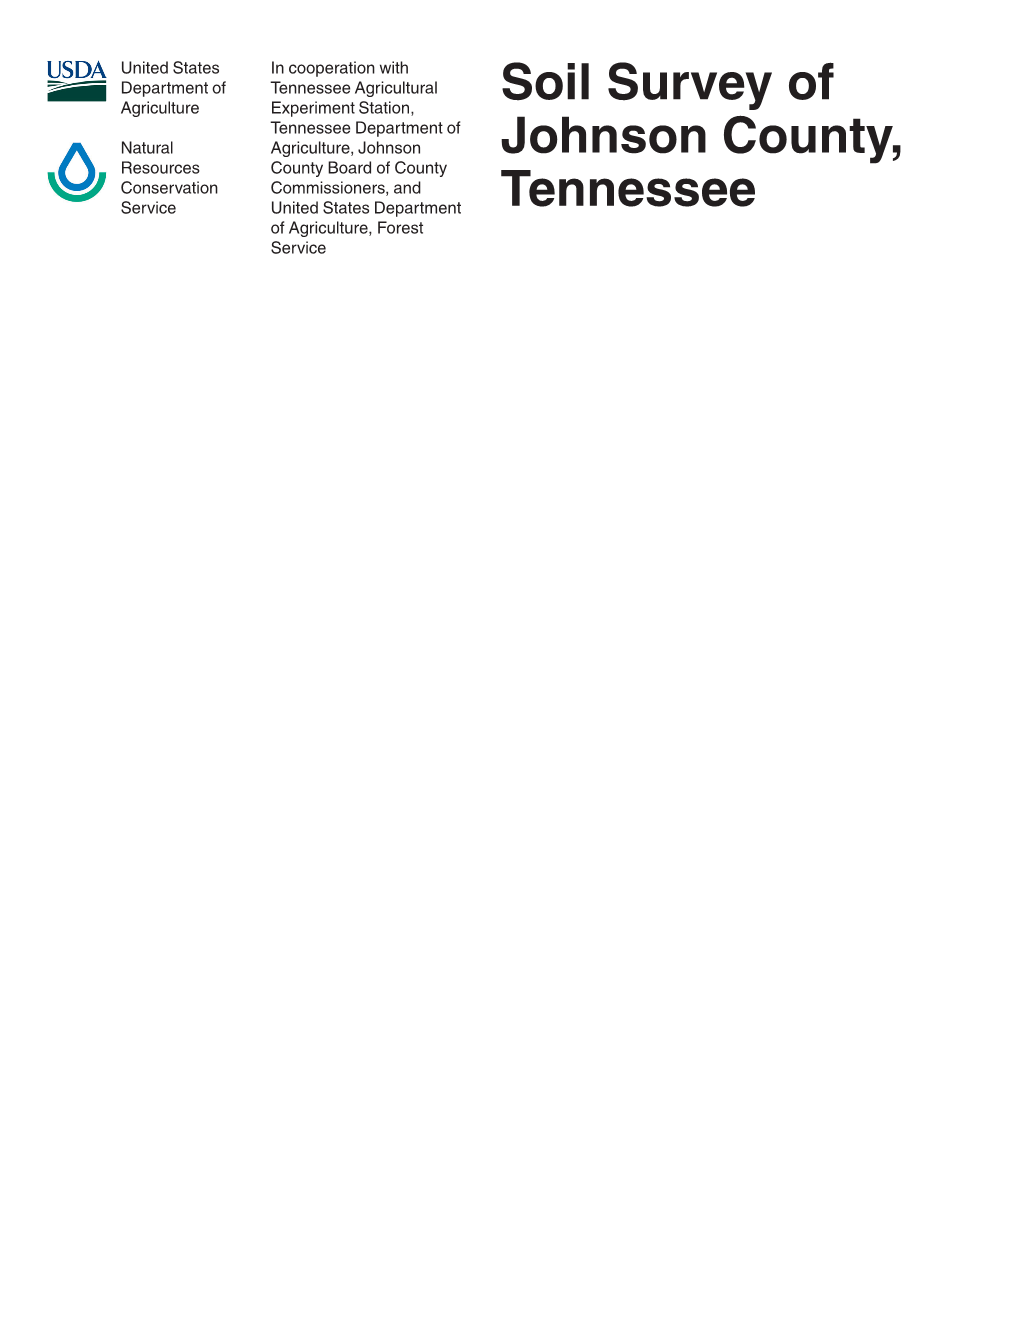 Soil Survey of Johnson County, Tennessee